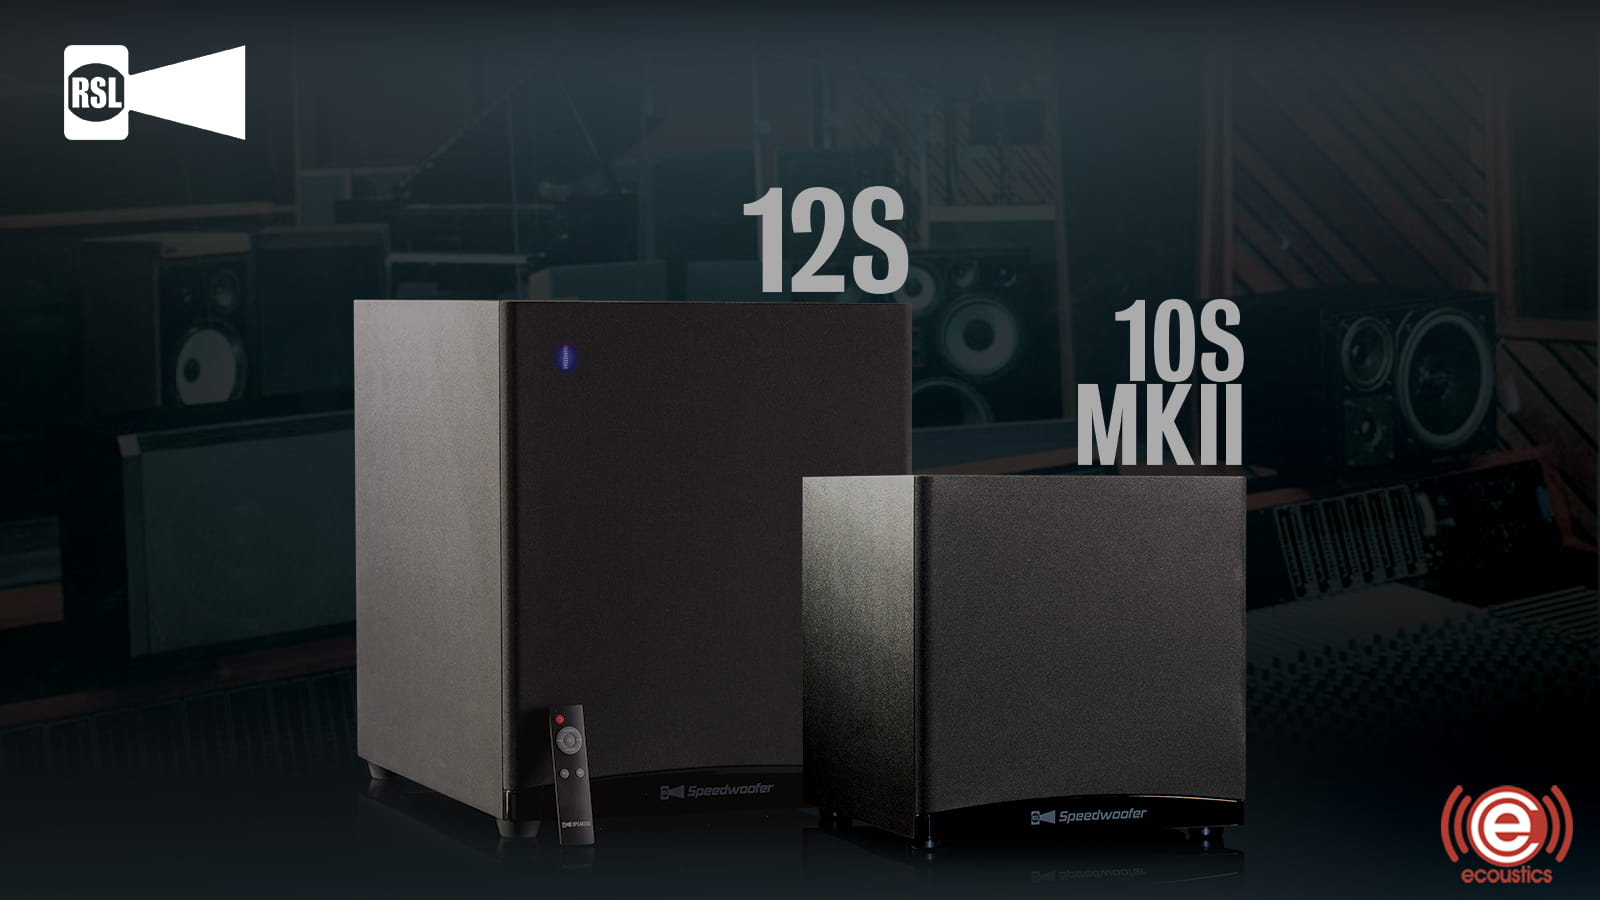 RSL Speedwoofer 12S vs. 10S MKII Subwoofer - which is right for you?